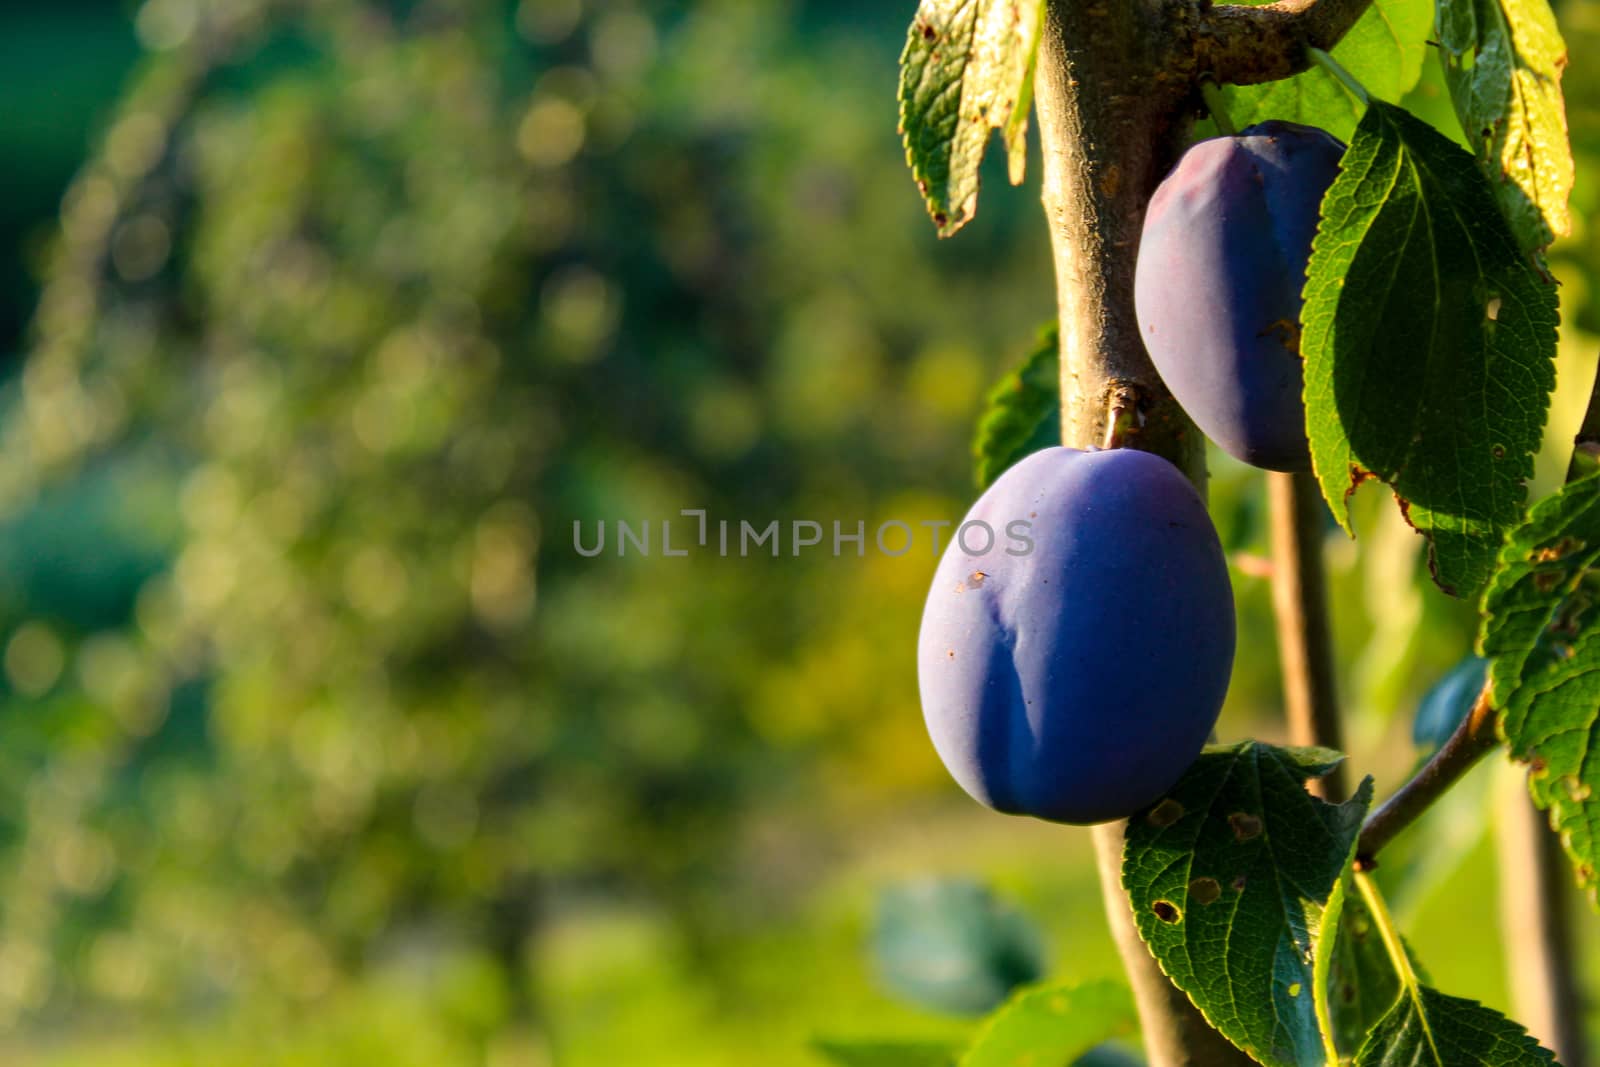 Two blue ripe plums on a branch with a leaf with a blurred background. Ideal background for copy text. by mahirrov